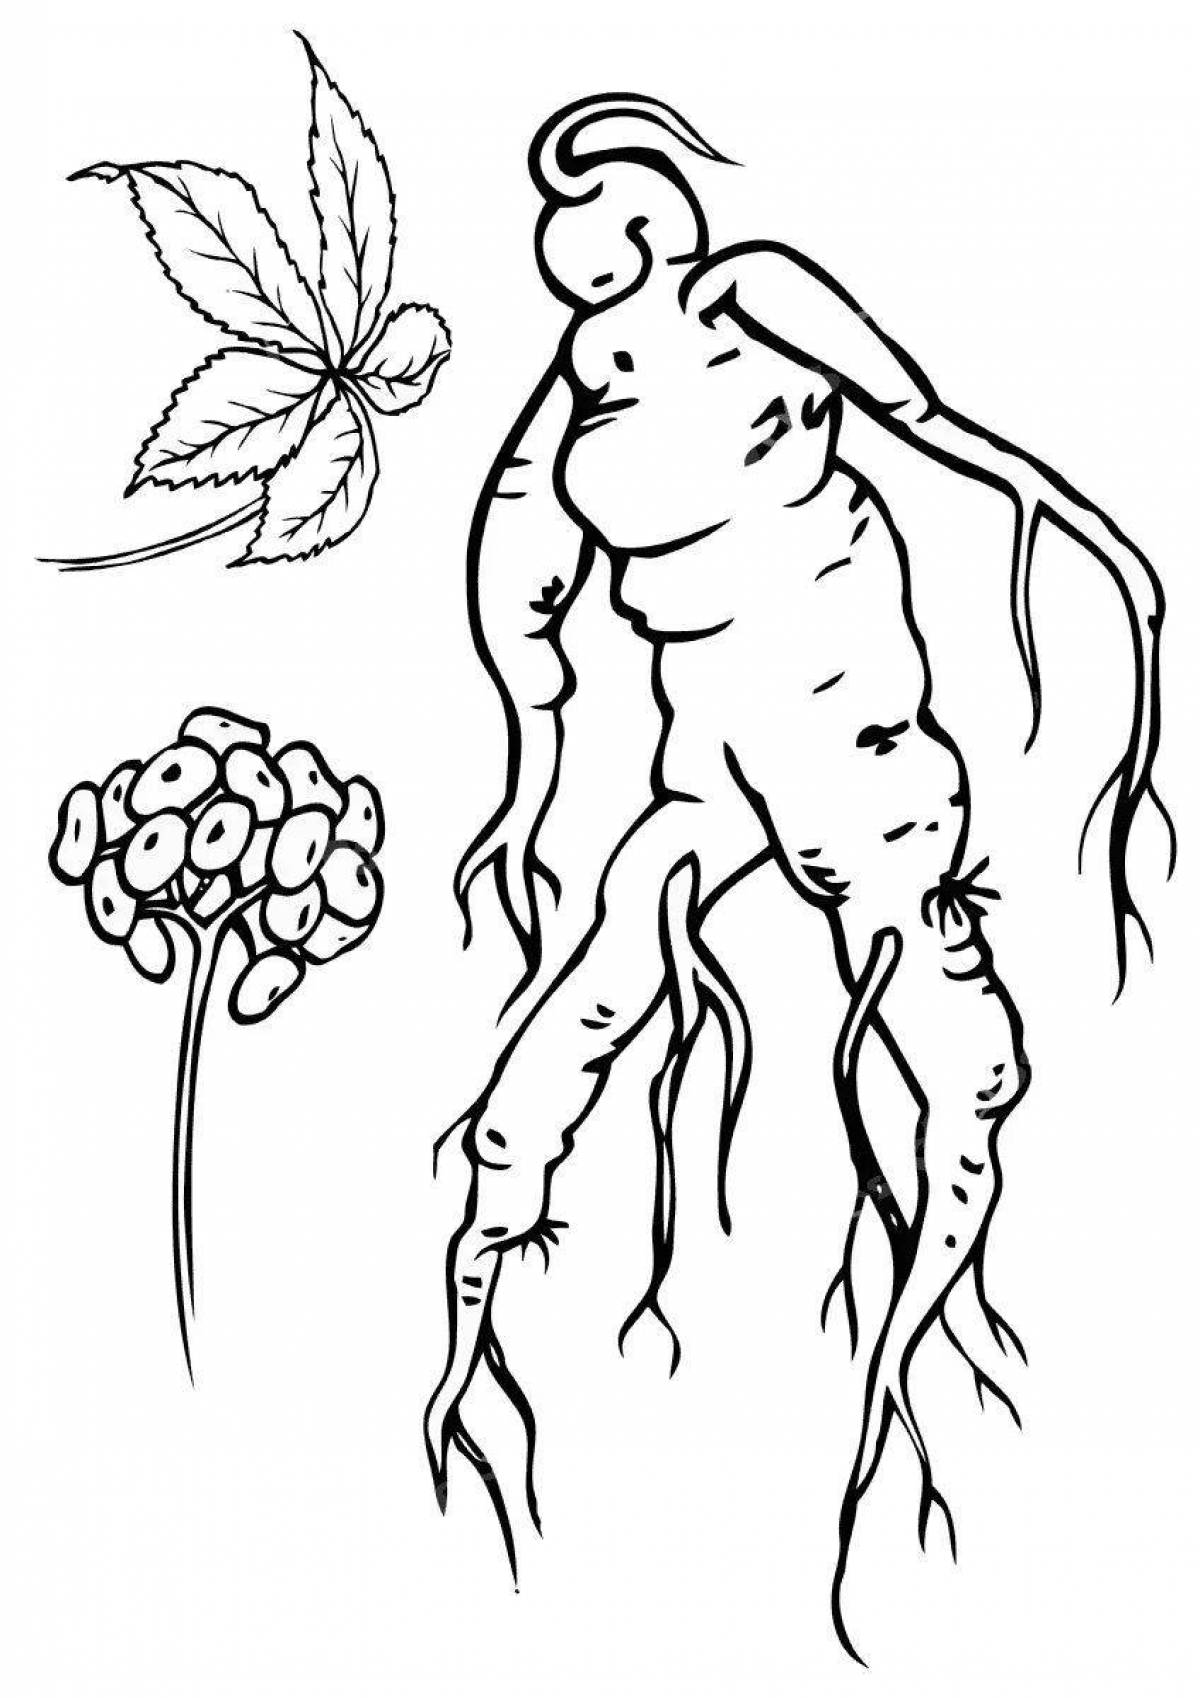 Charming ginseng coloring page